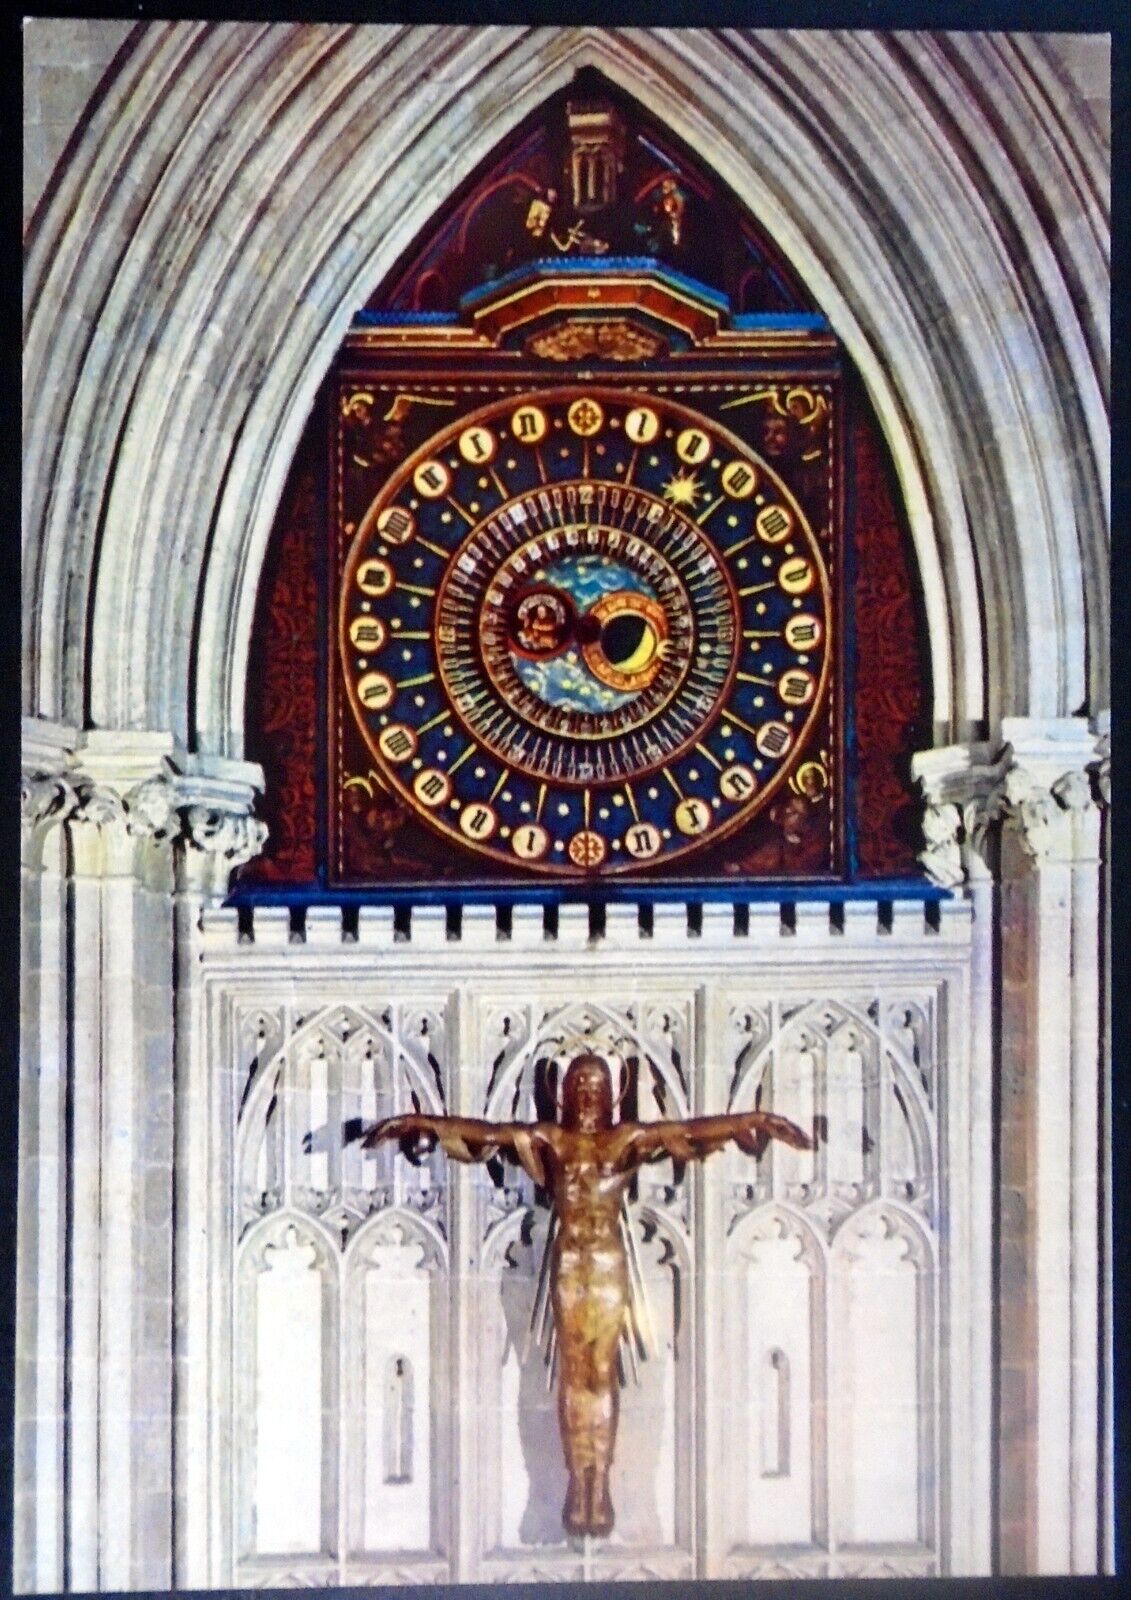 Late 14th Century Clock, Wells Cathedral, Crucifix, Wells, Somerset, England